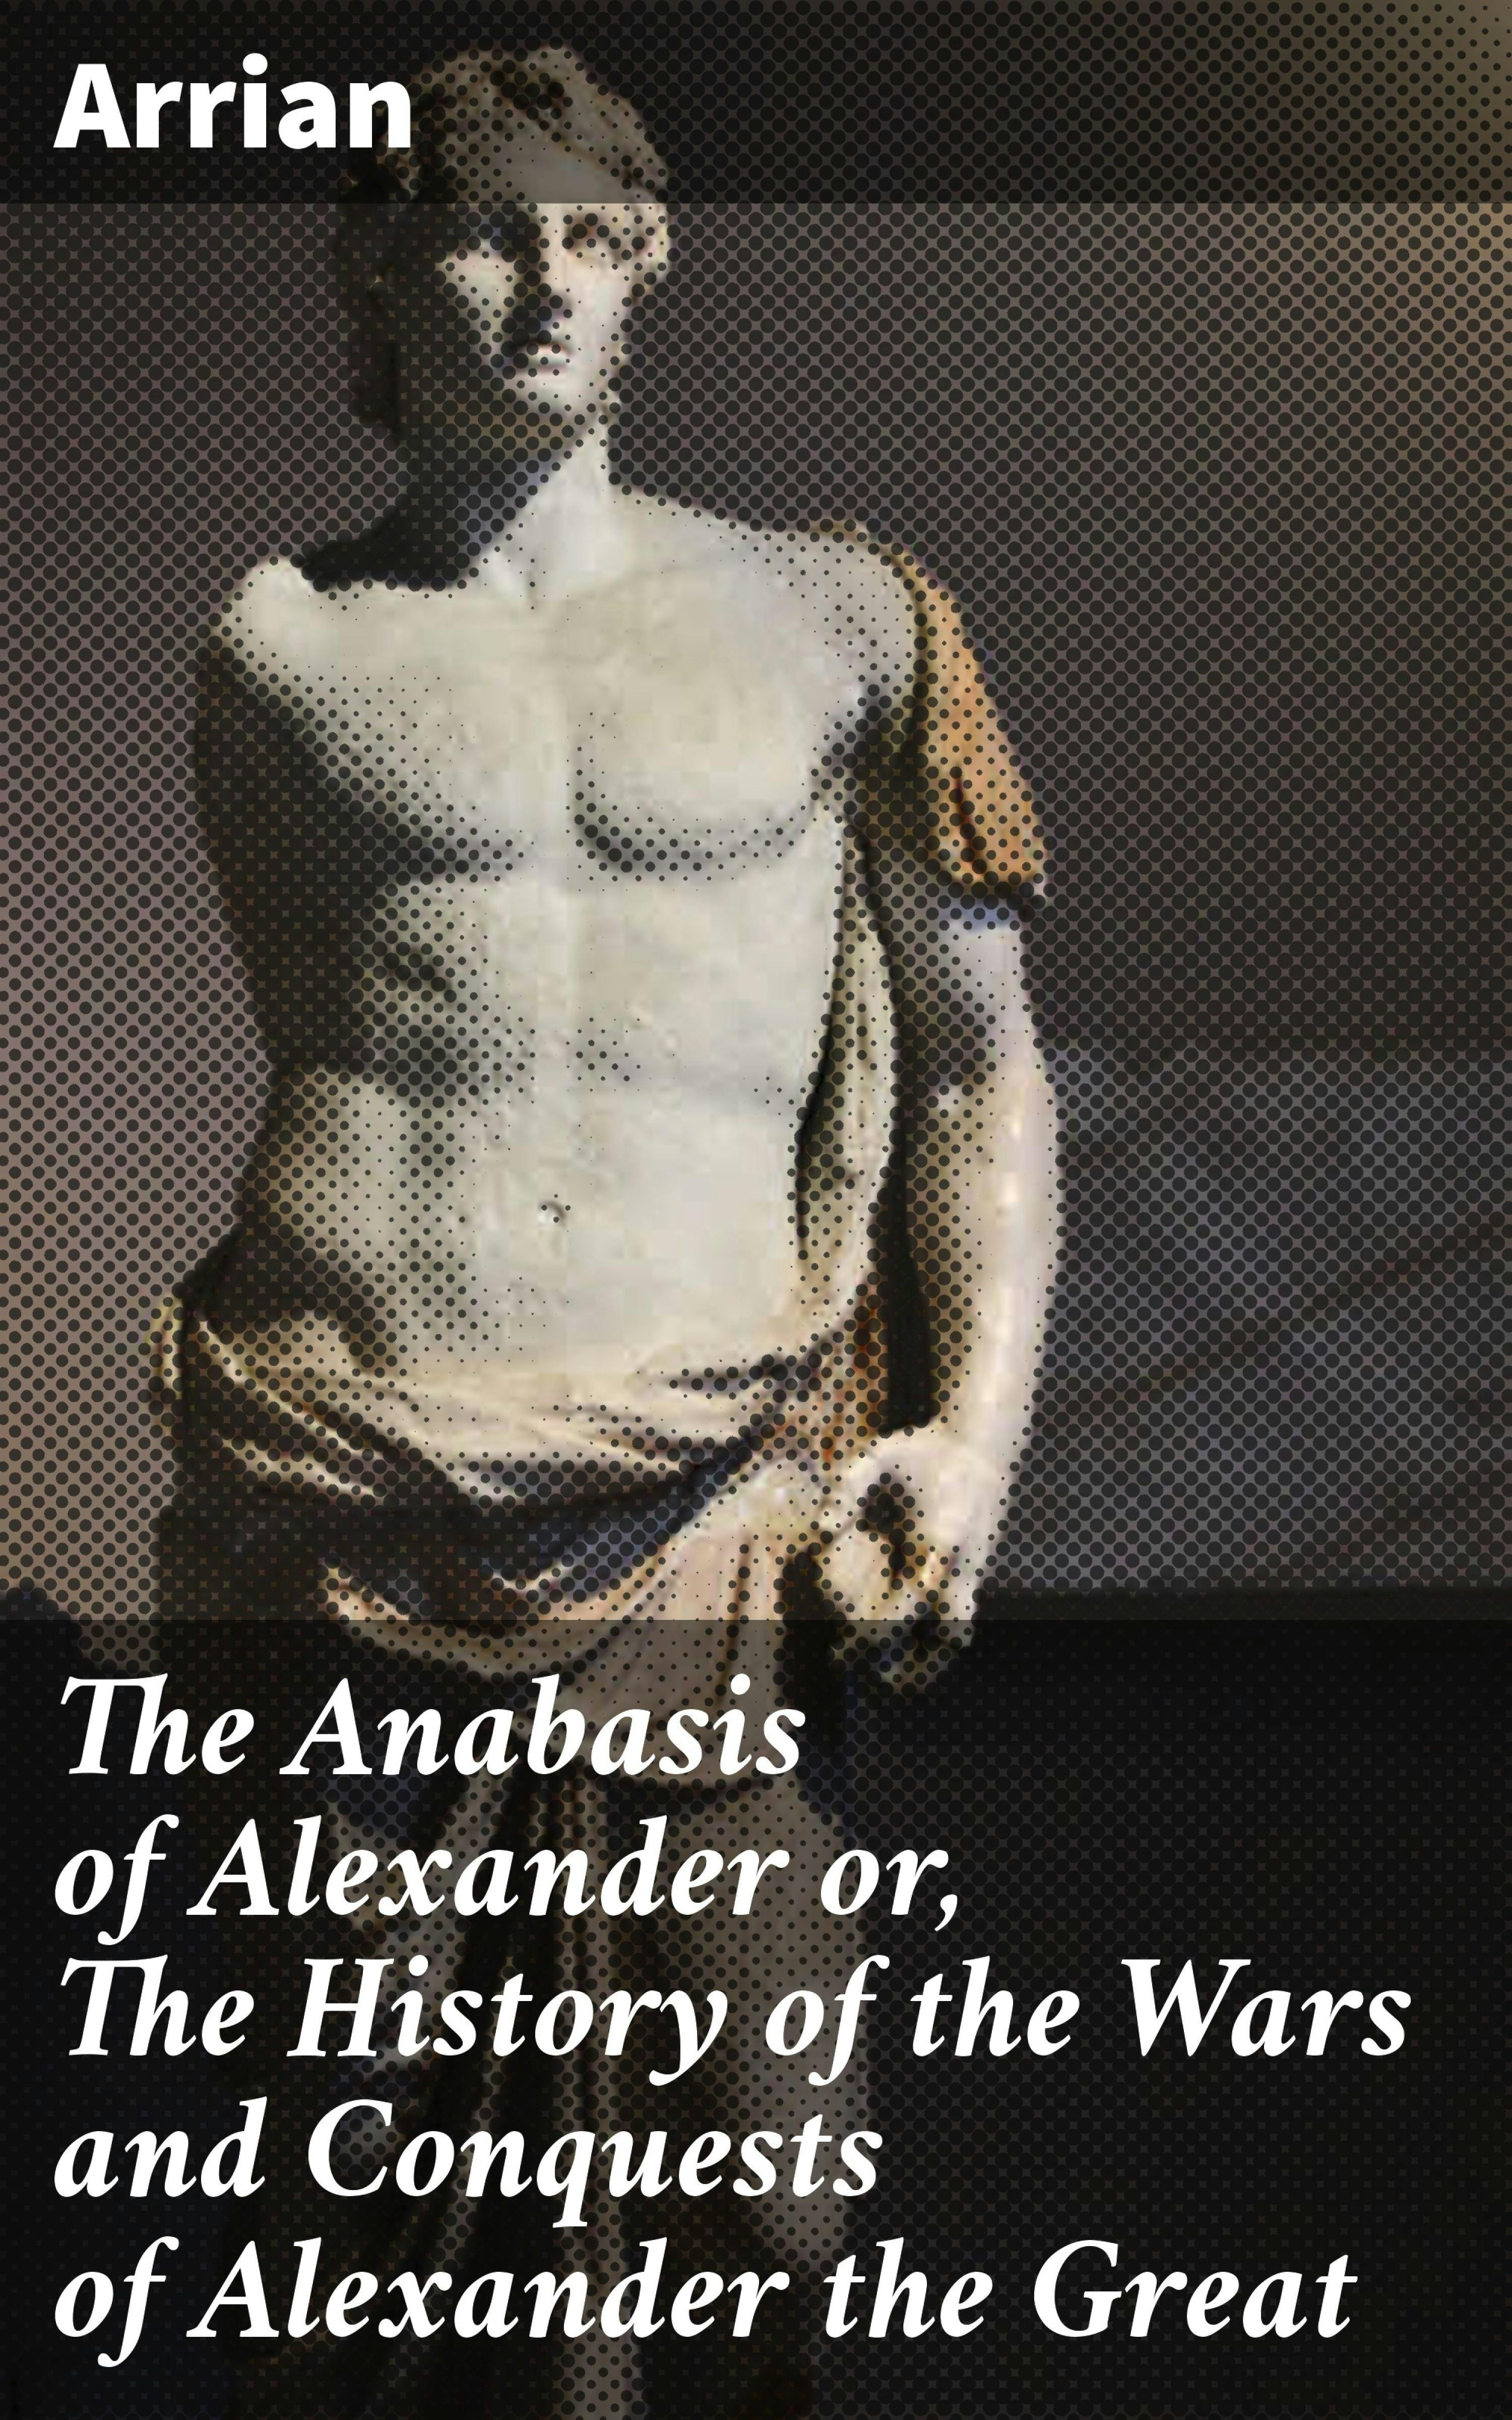 The Anabasis of Alexander or, The History of the Wars and Conquests of Alexander the Great - Arrian